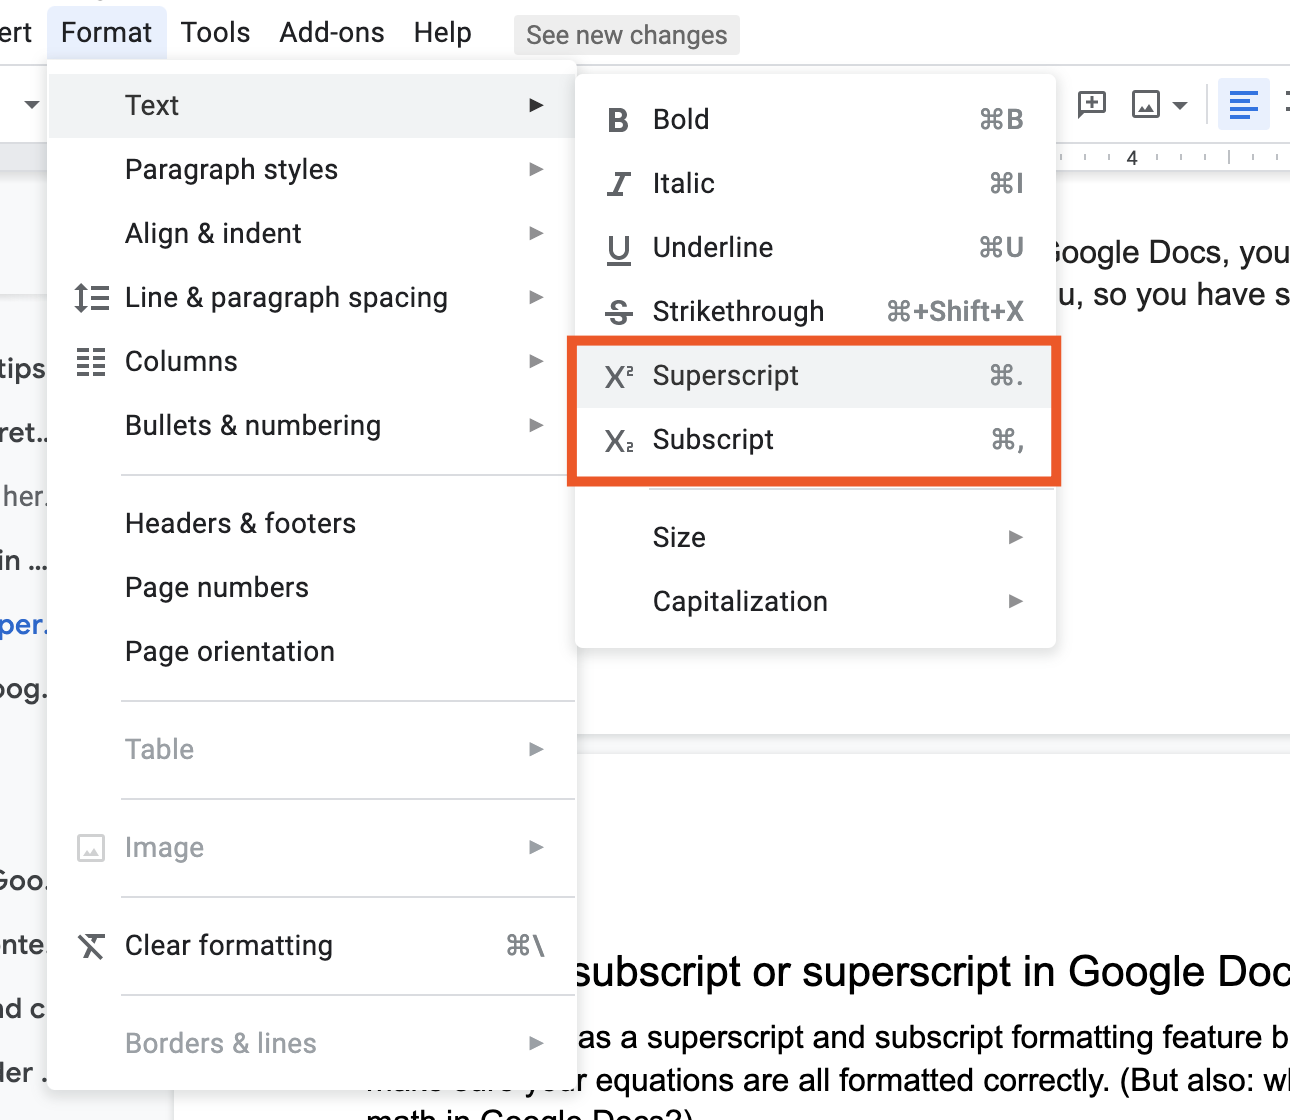 How to do subscript or superscript in Google Docs.